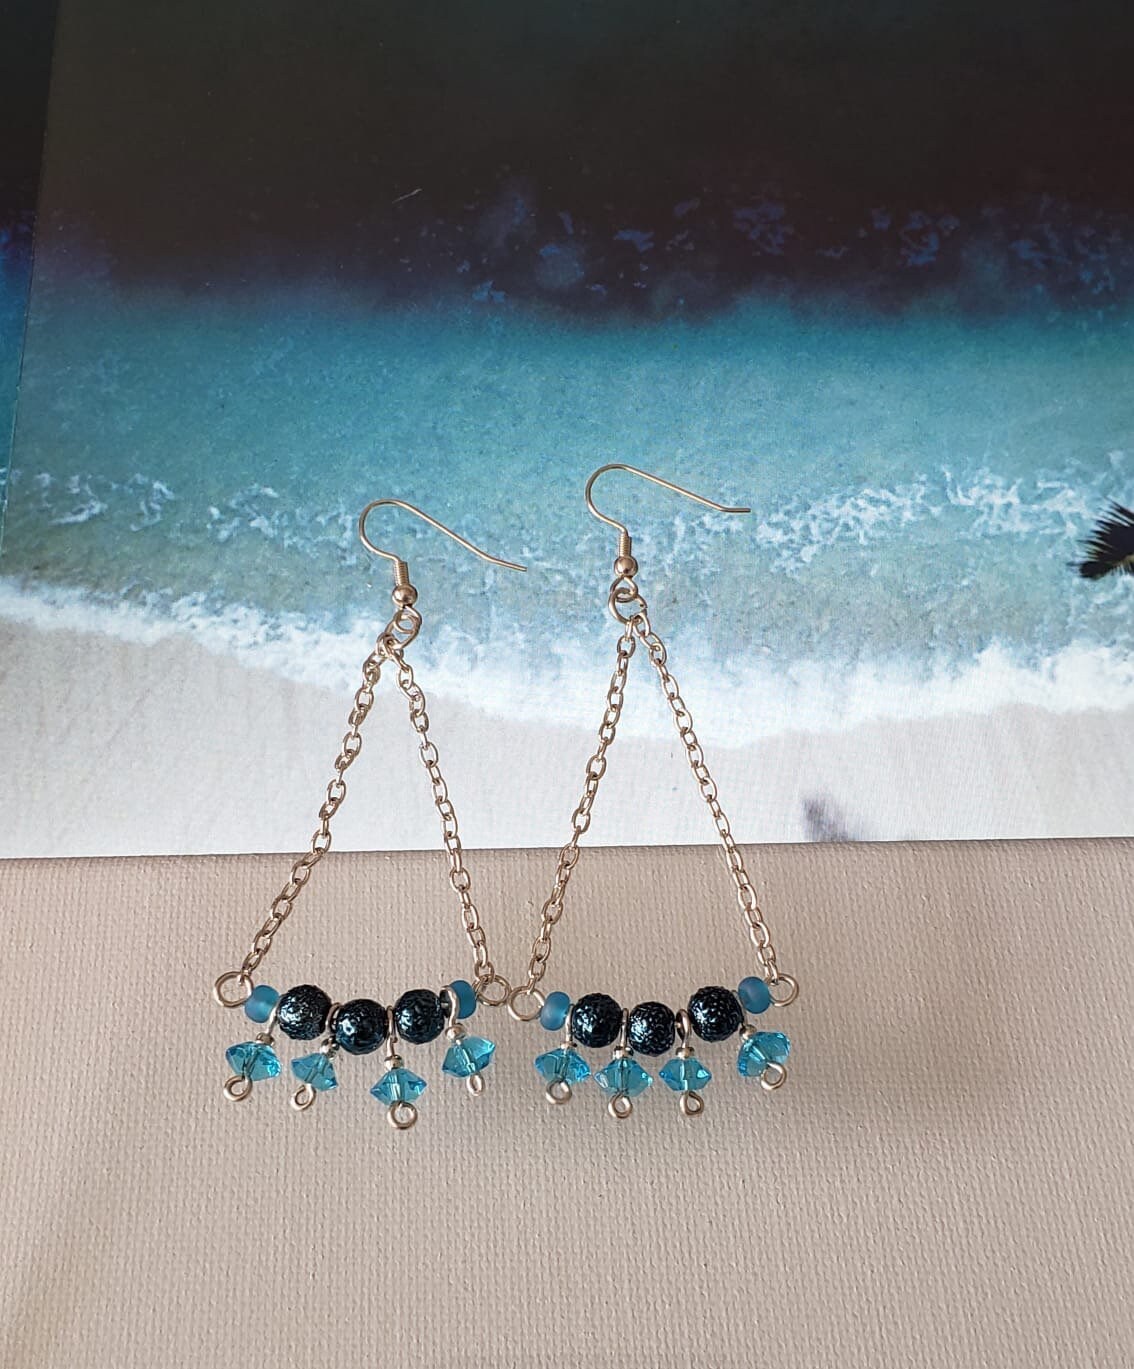 Handmade silver and turquoise swarovski earrings  I Love Dolly